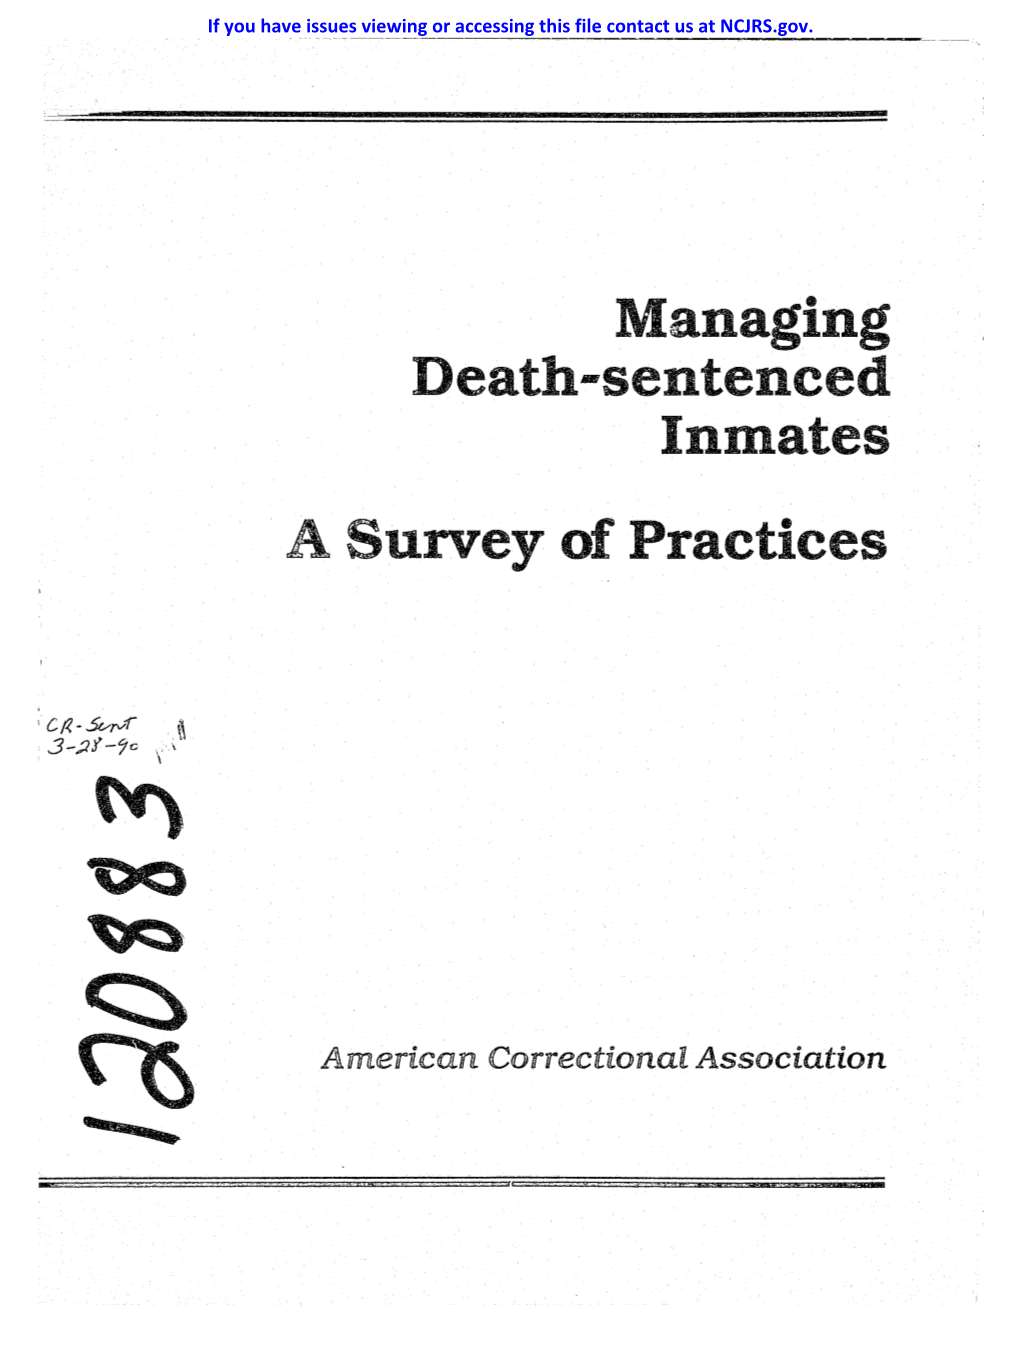 Managing a Survey of Practices